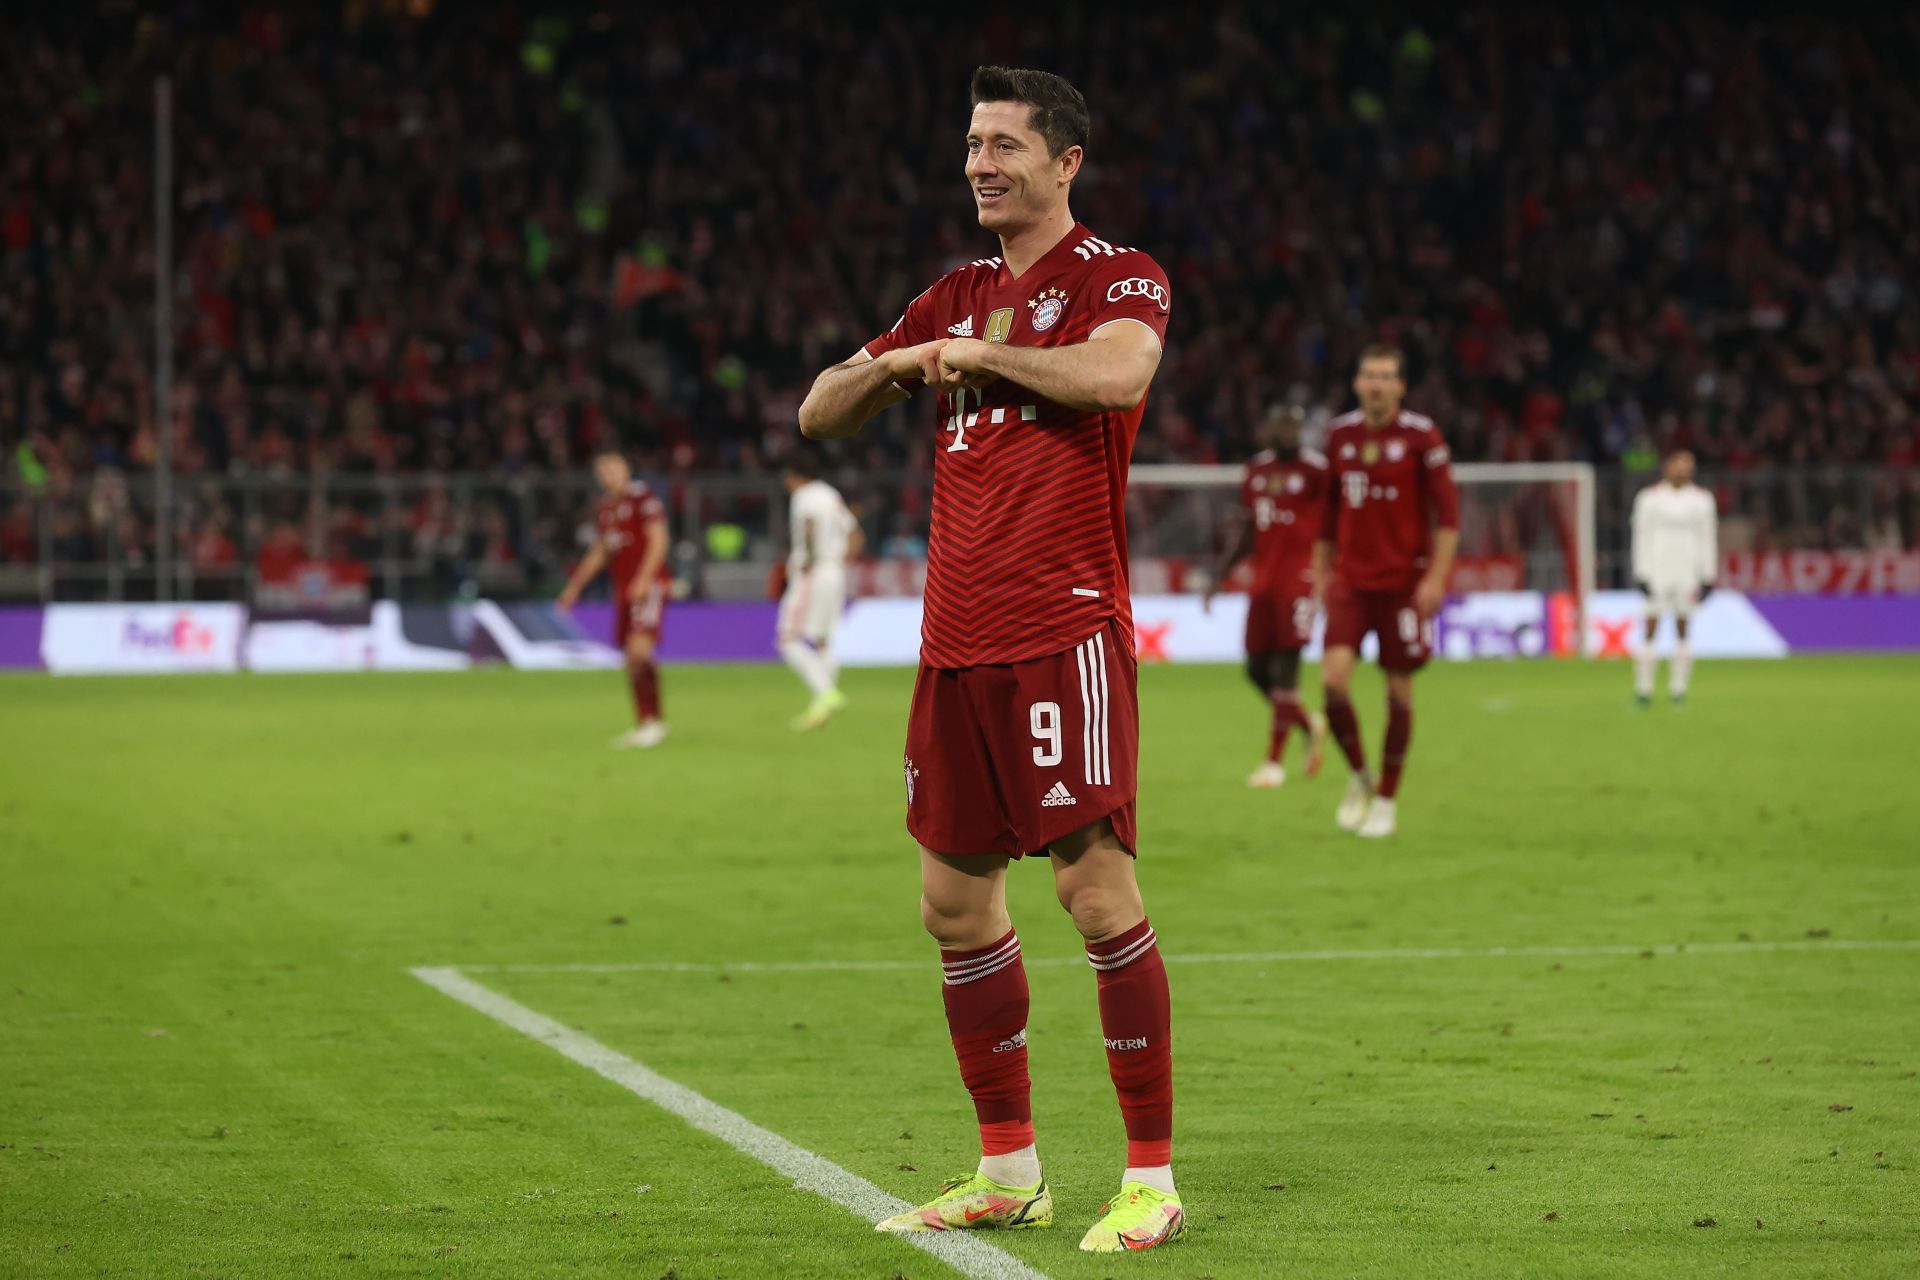 Robert Lewandowski is one of the most successful strikers in Champions League history